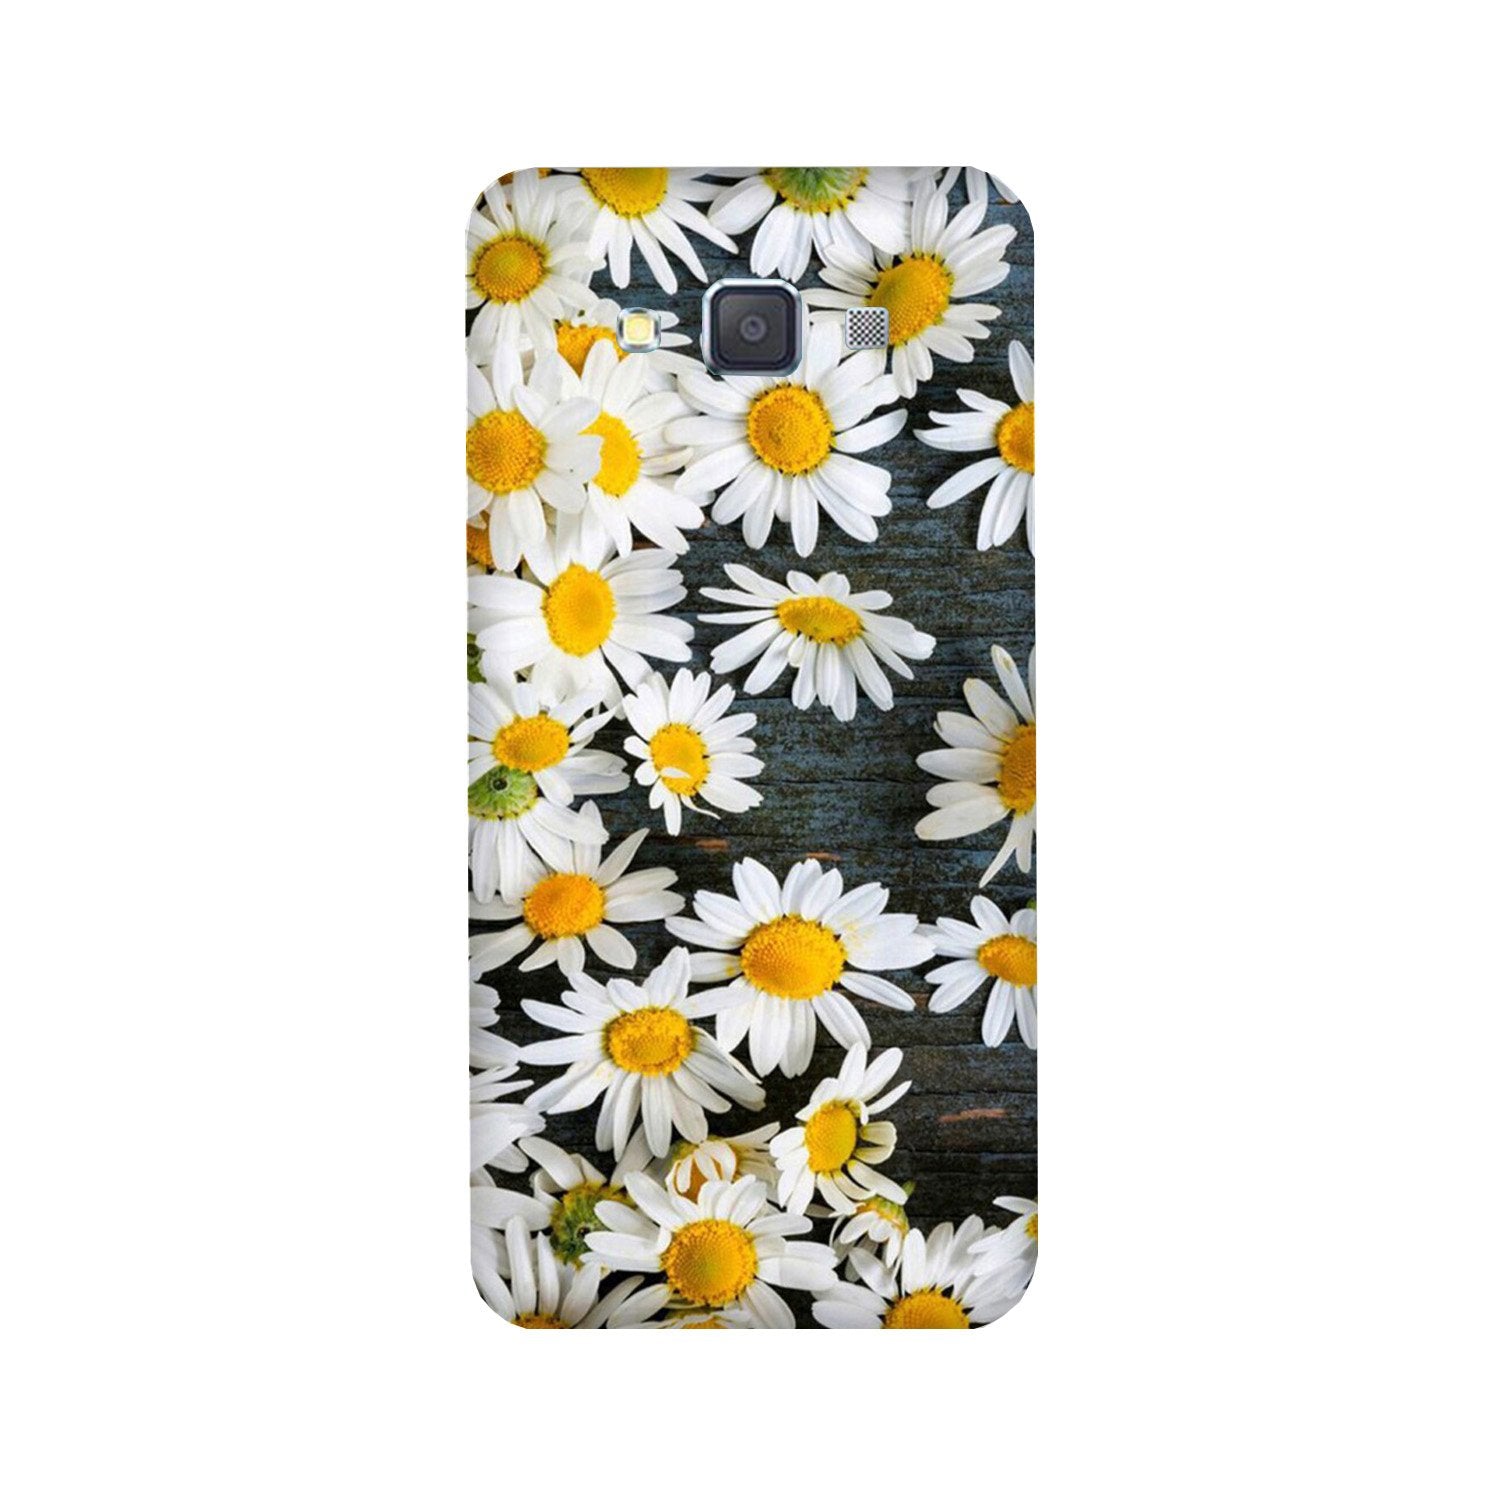 White flowers2 Case for Galaxy A3 (2015)